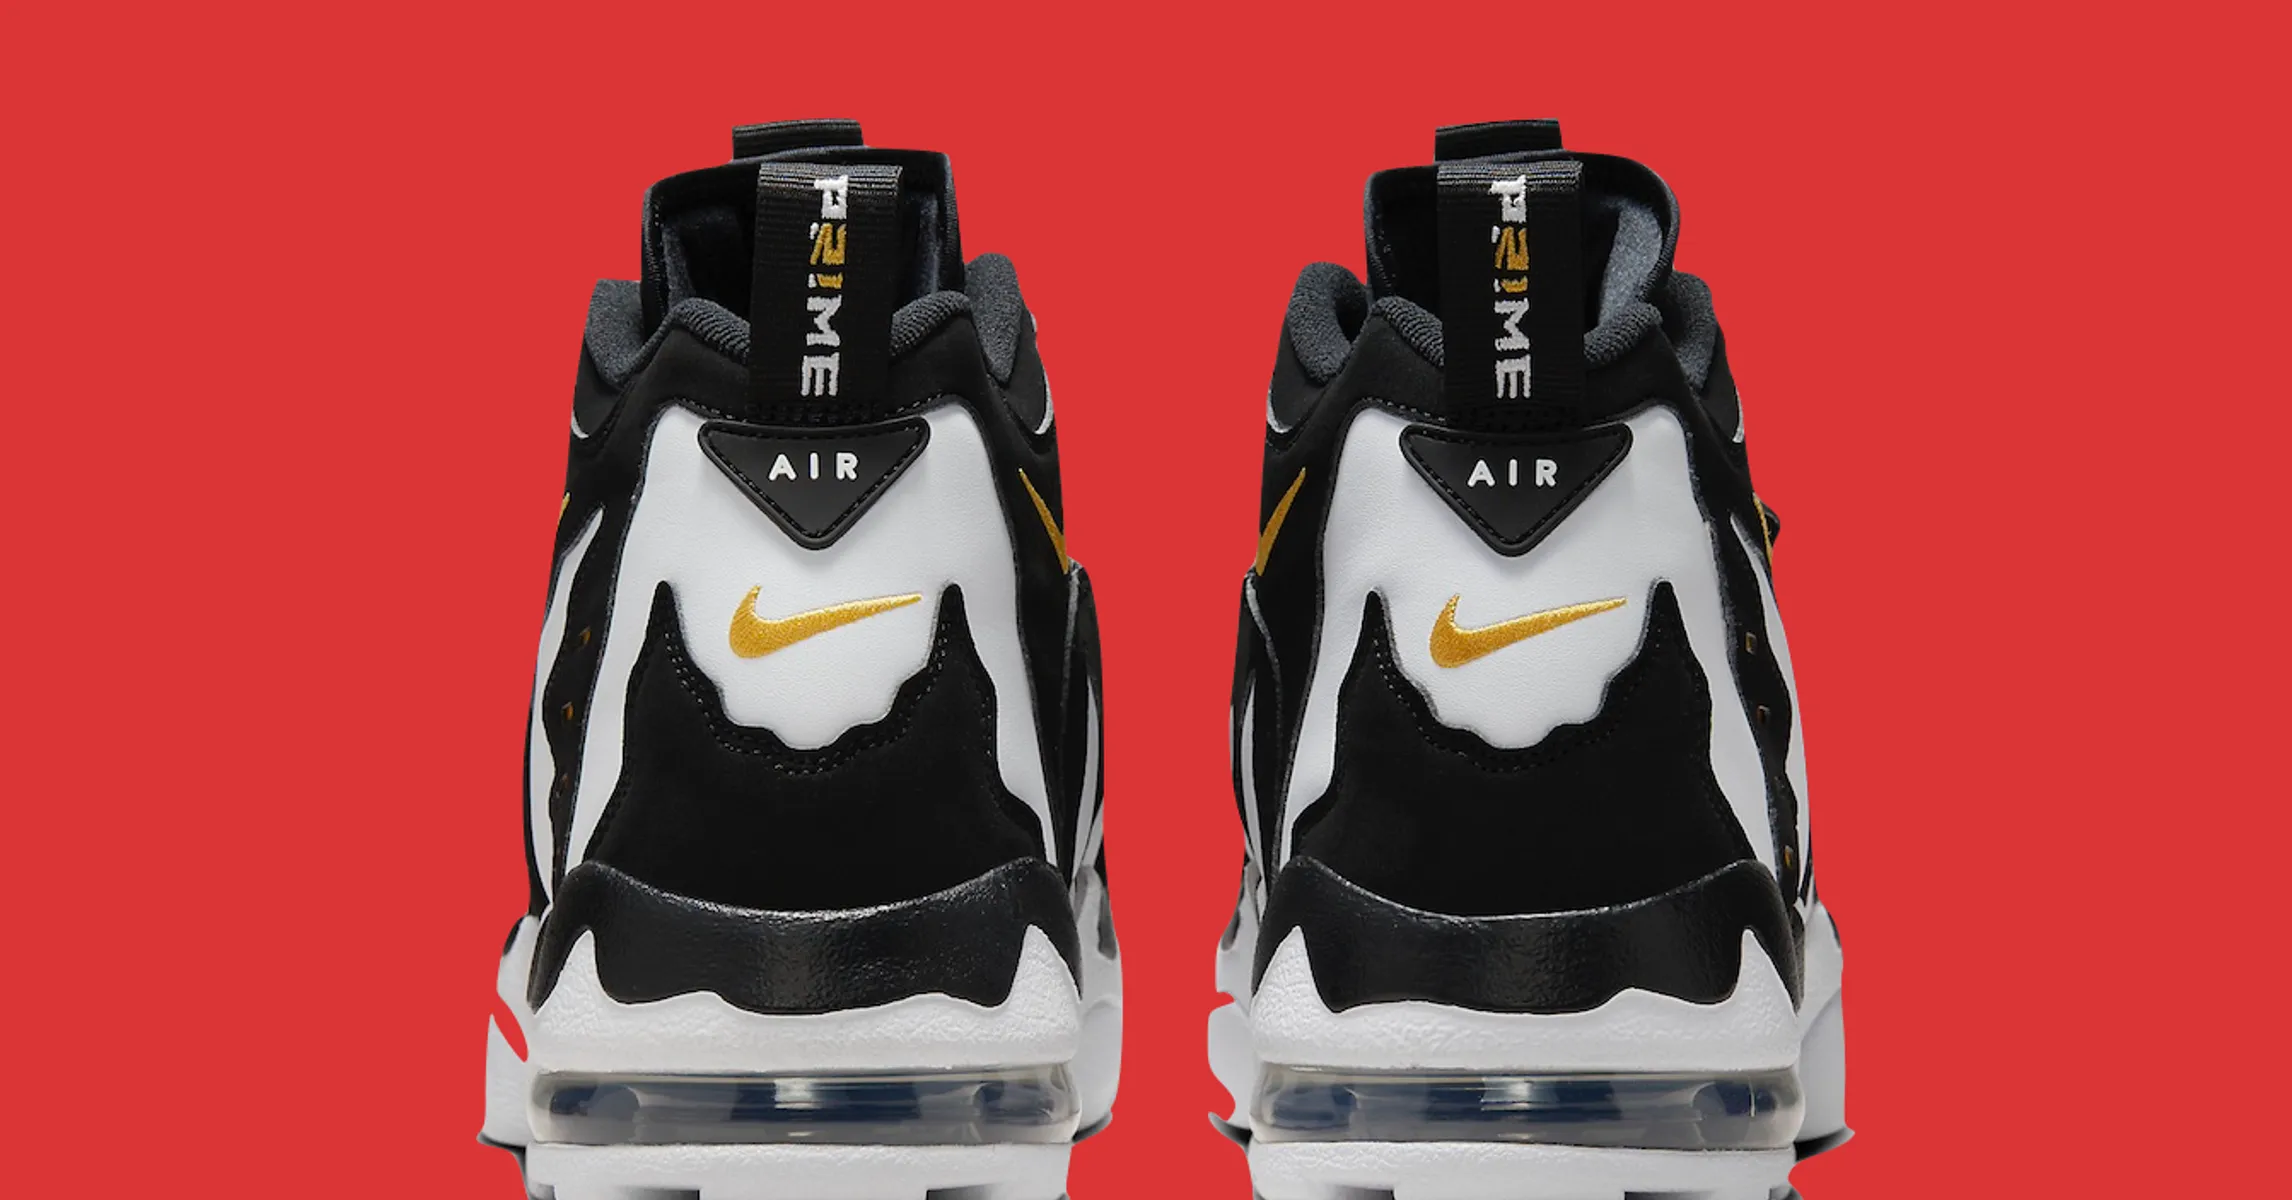 Nike Air DT Max '96 “Black/Varsity Maize” Global Release Date